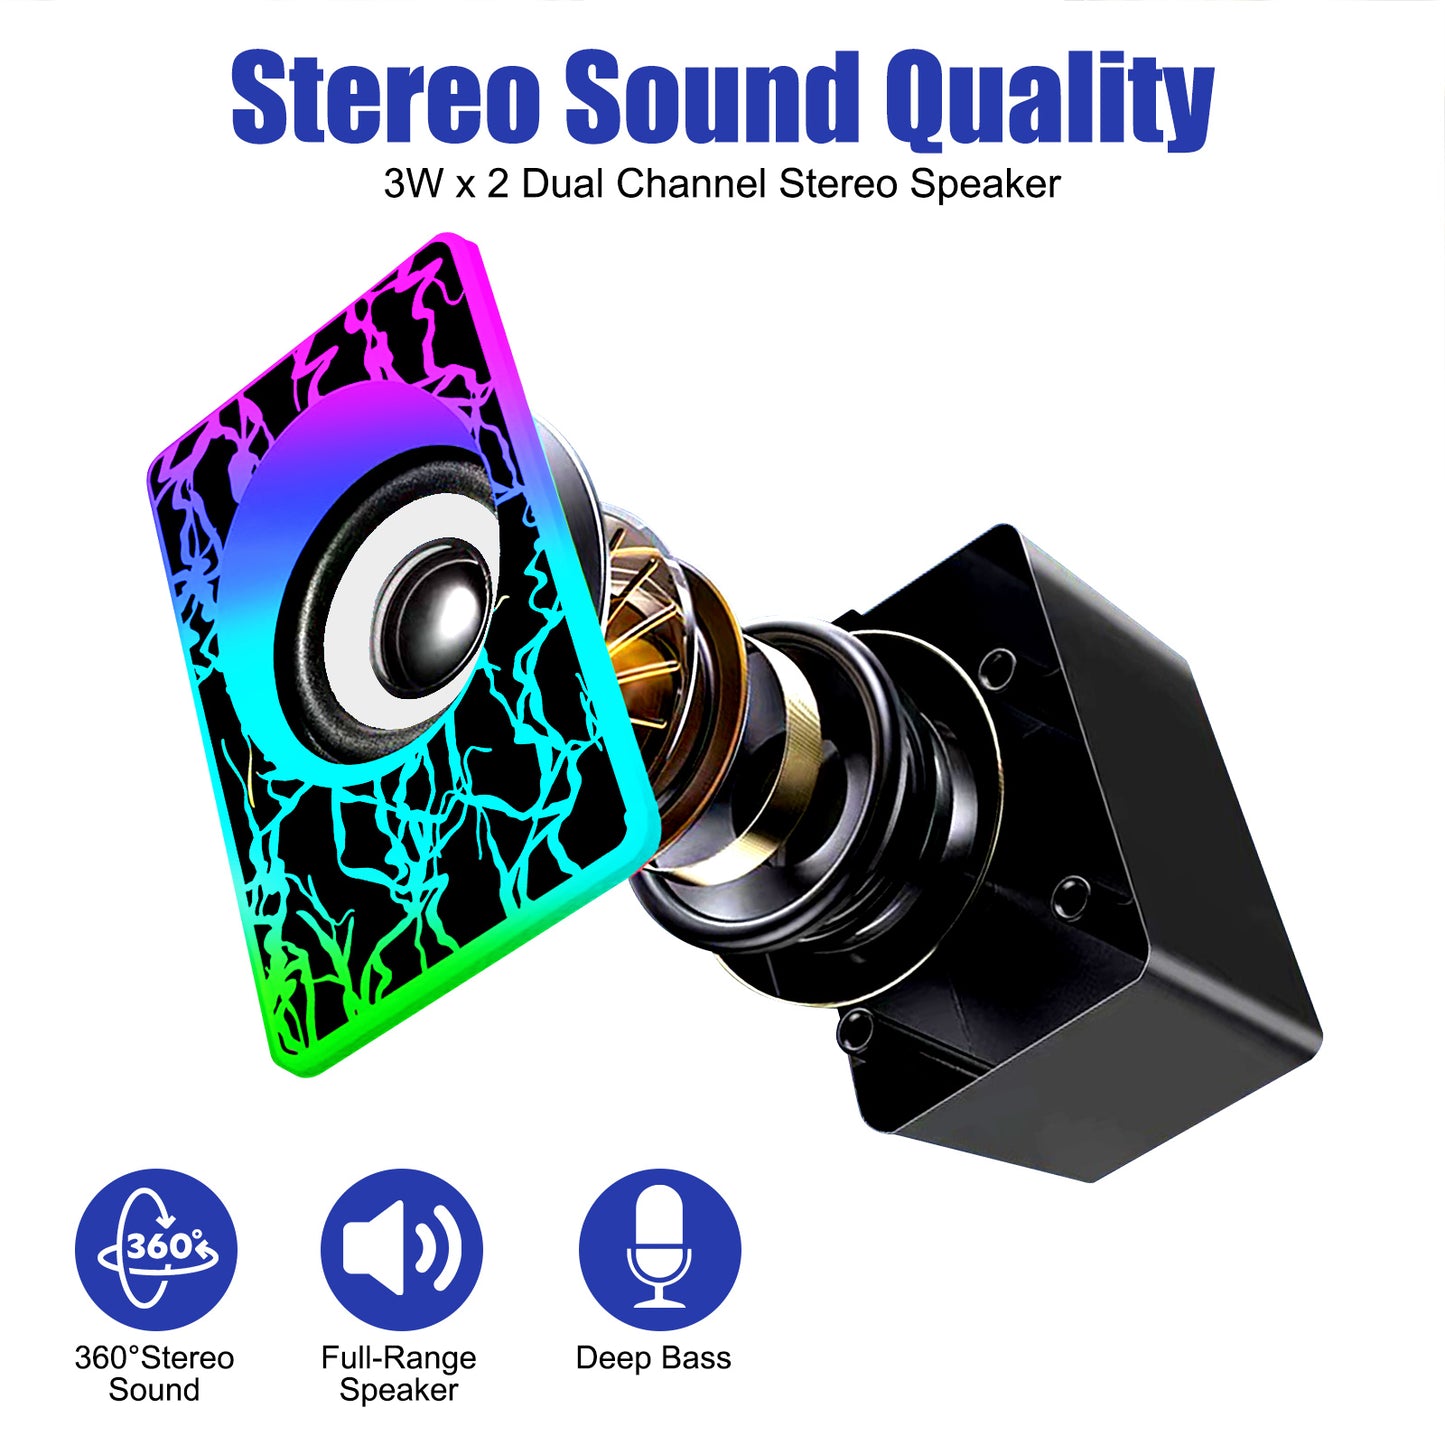 RGB Lighting usb wired small computer speakers - Subwoofer Stereo Bass Sound 3.5mm,for desktops laptops smartphones tablets